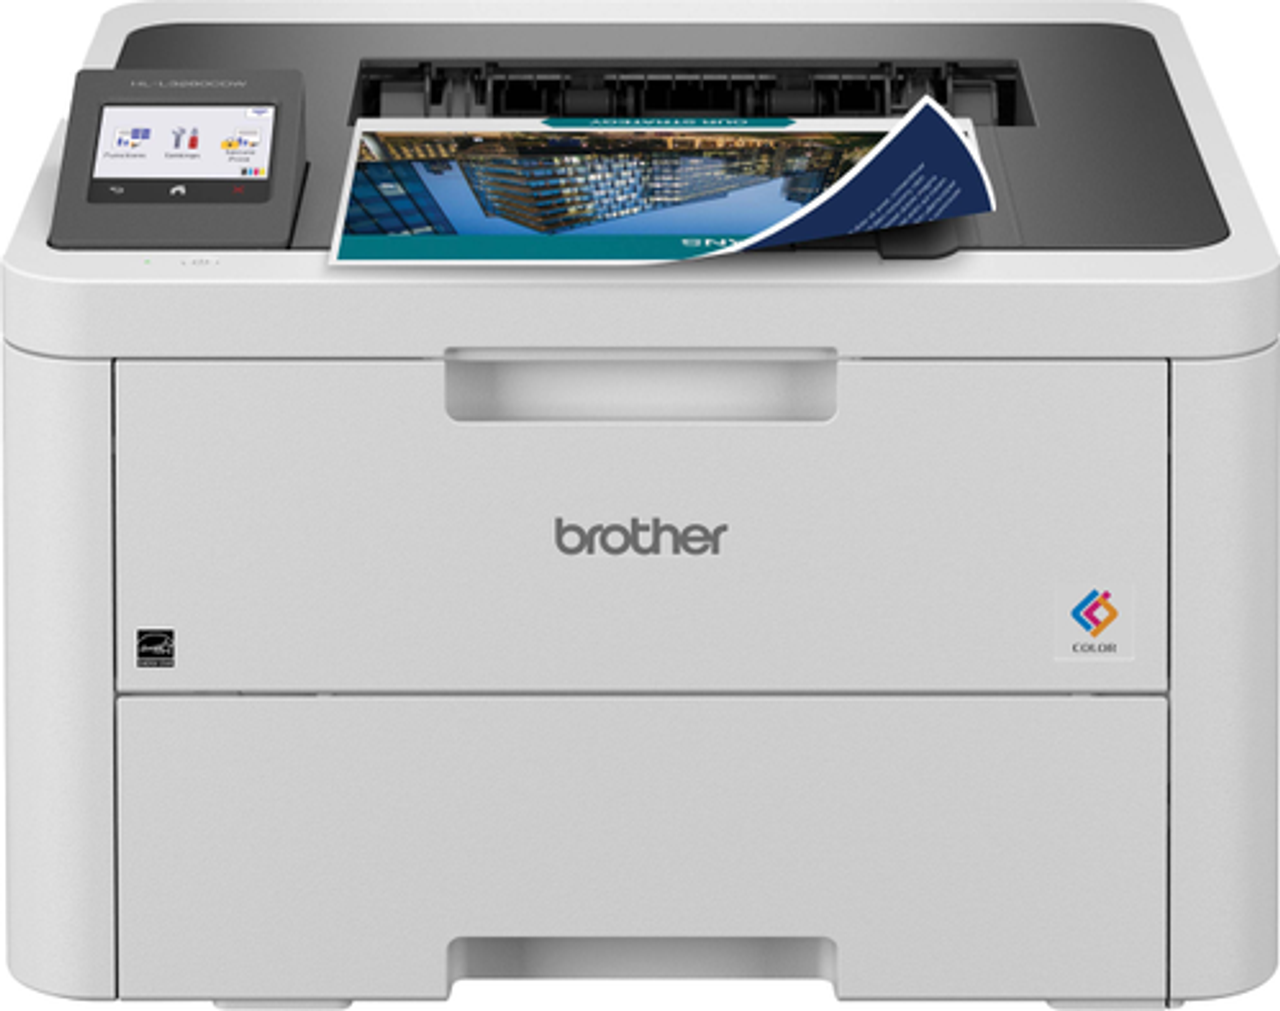 Brother - HL-L3280CDW Wireless Color Digital Printer with Laser Quality Output and Refresh Subscription Eligibility - White